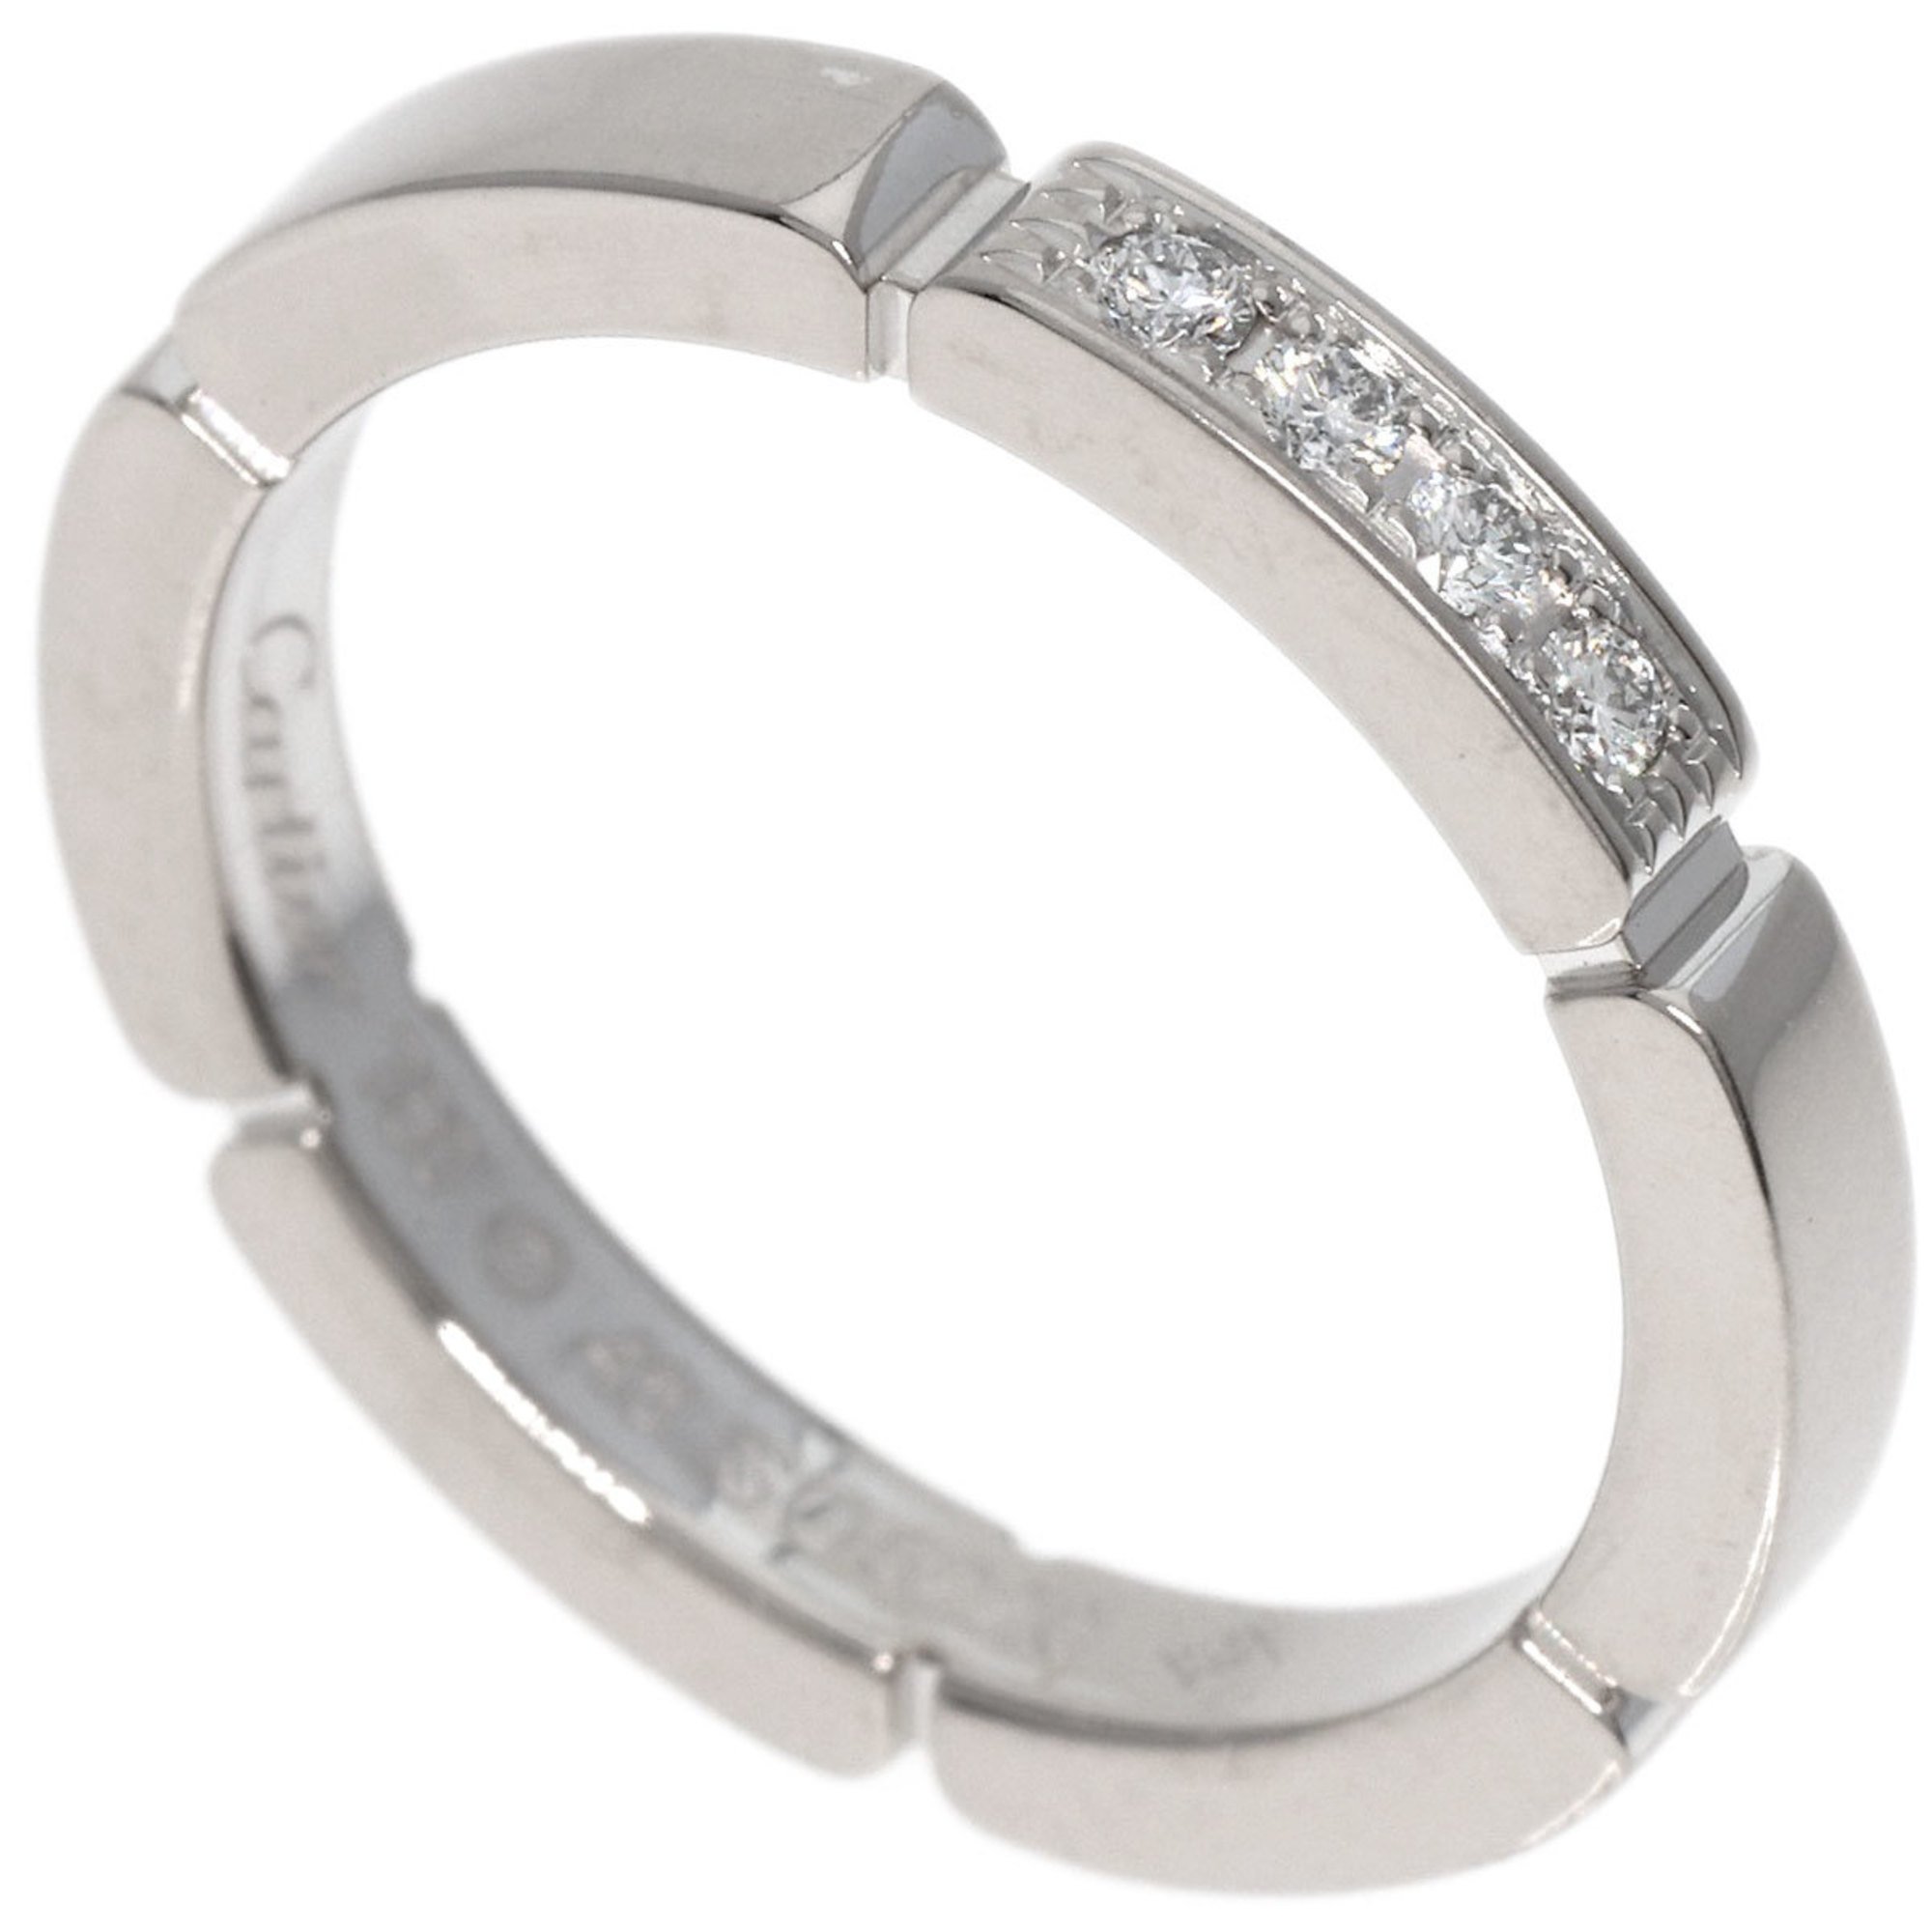 Cartier Maillon Panthere 4P Diamond #48 Ring, K18 White Gold, Women's, CARTIER